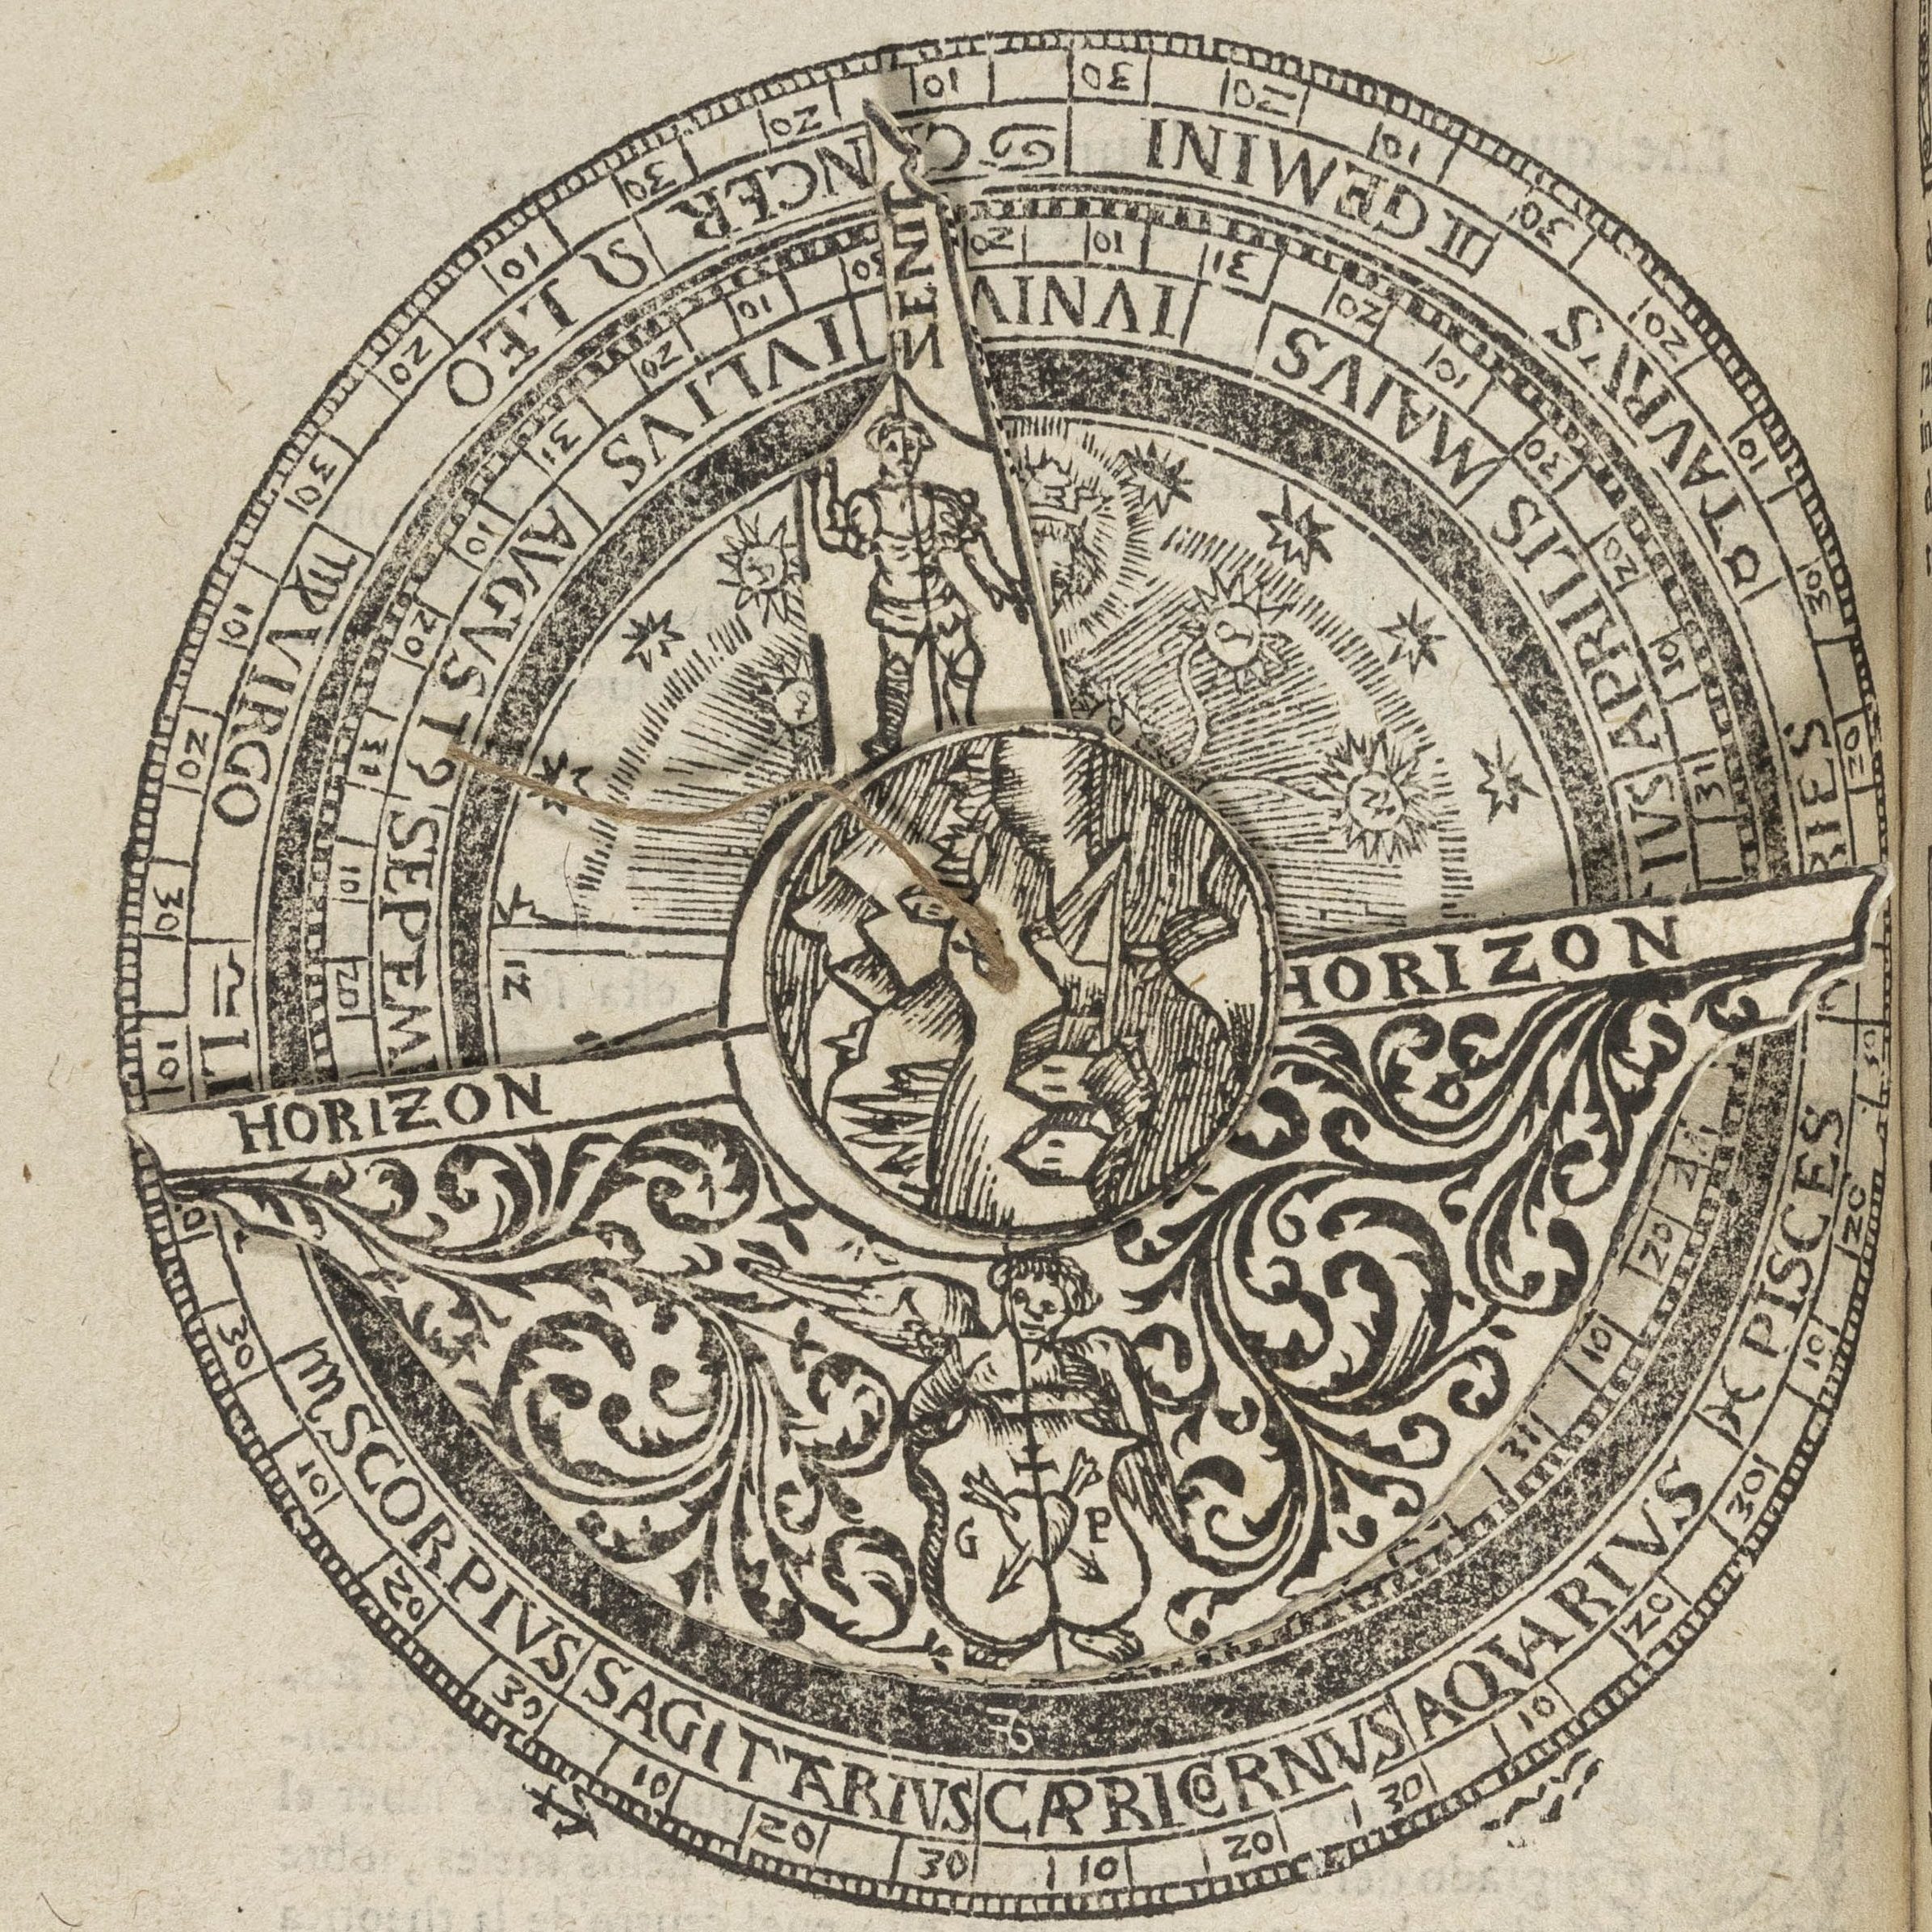 Printed circle with a movable dial in the center. The dial has three points, two across the diameter (each labeled "horizon") and one in the middle of these two, at right angles to the diameter (labeled "zenit" or "zenith"). The middle of the dial is decorated with a drawing of a mountain village. The circle underneath the dial is broken up into the astrological signs and the months of the year, with stars in other designs in the center. Below the image are a few lines of printed Latin.